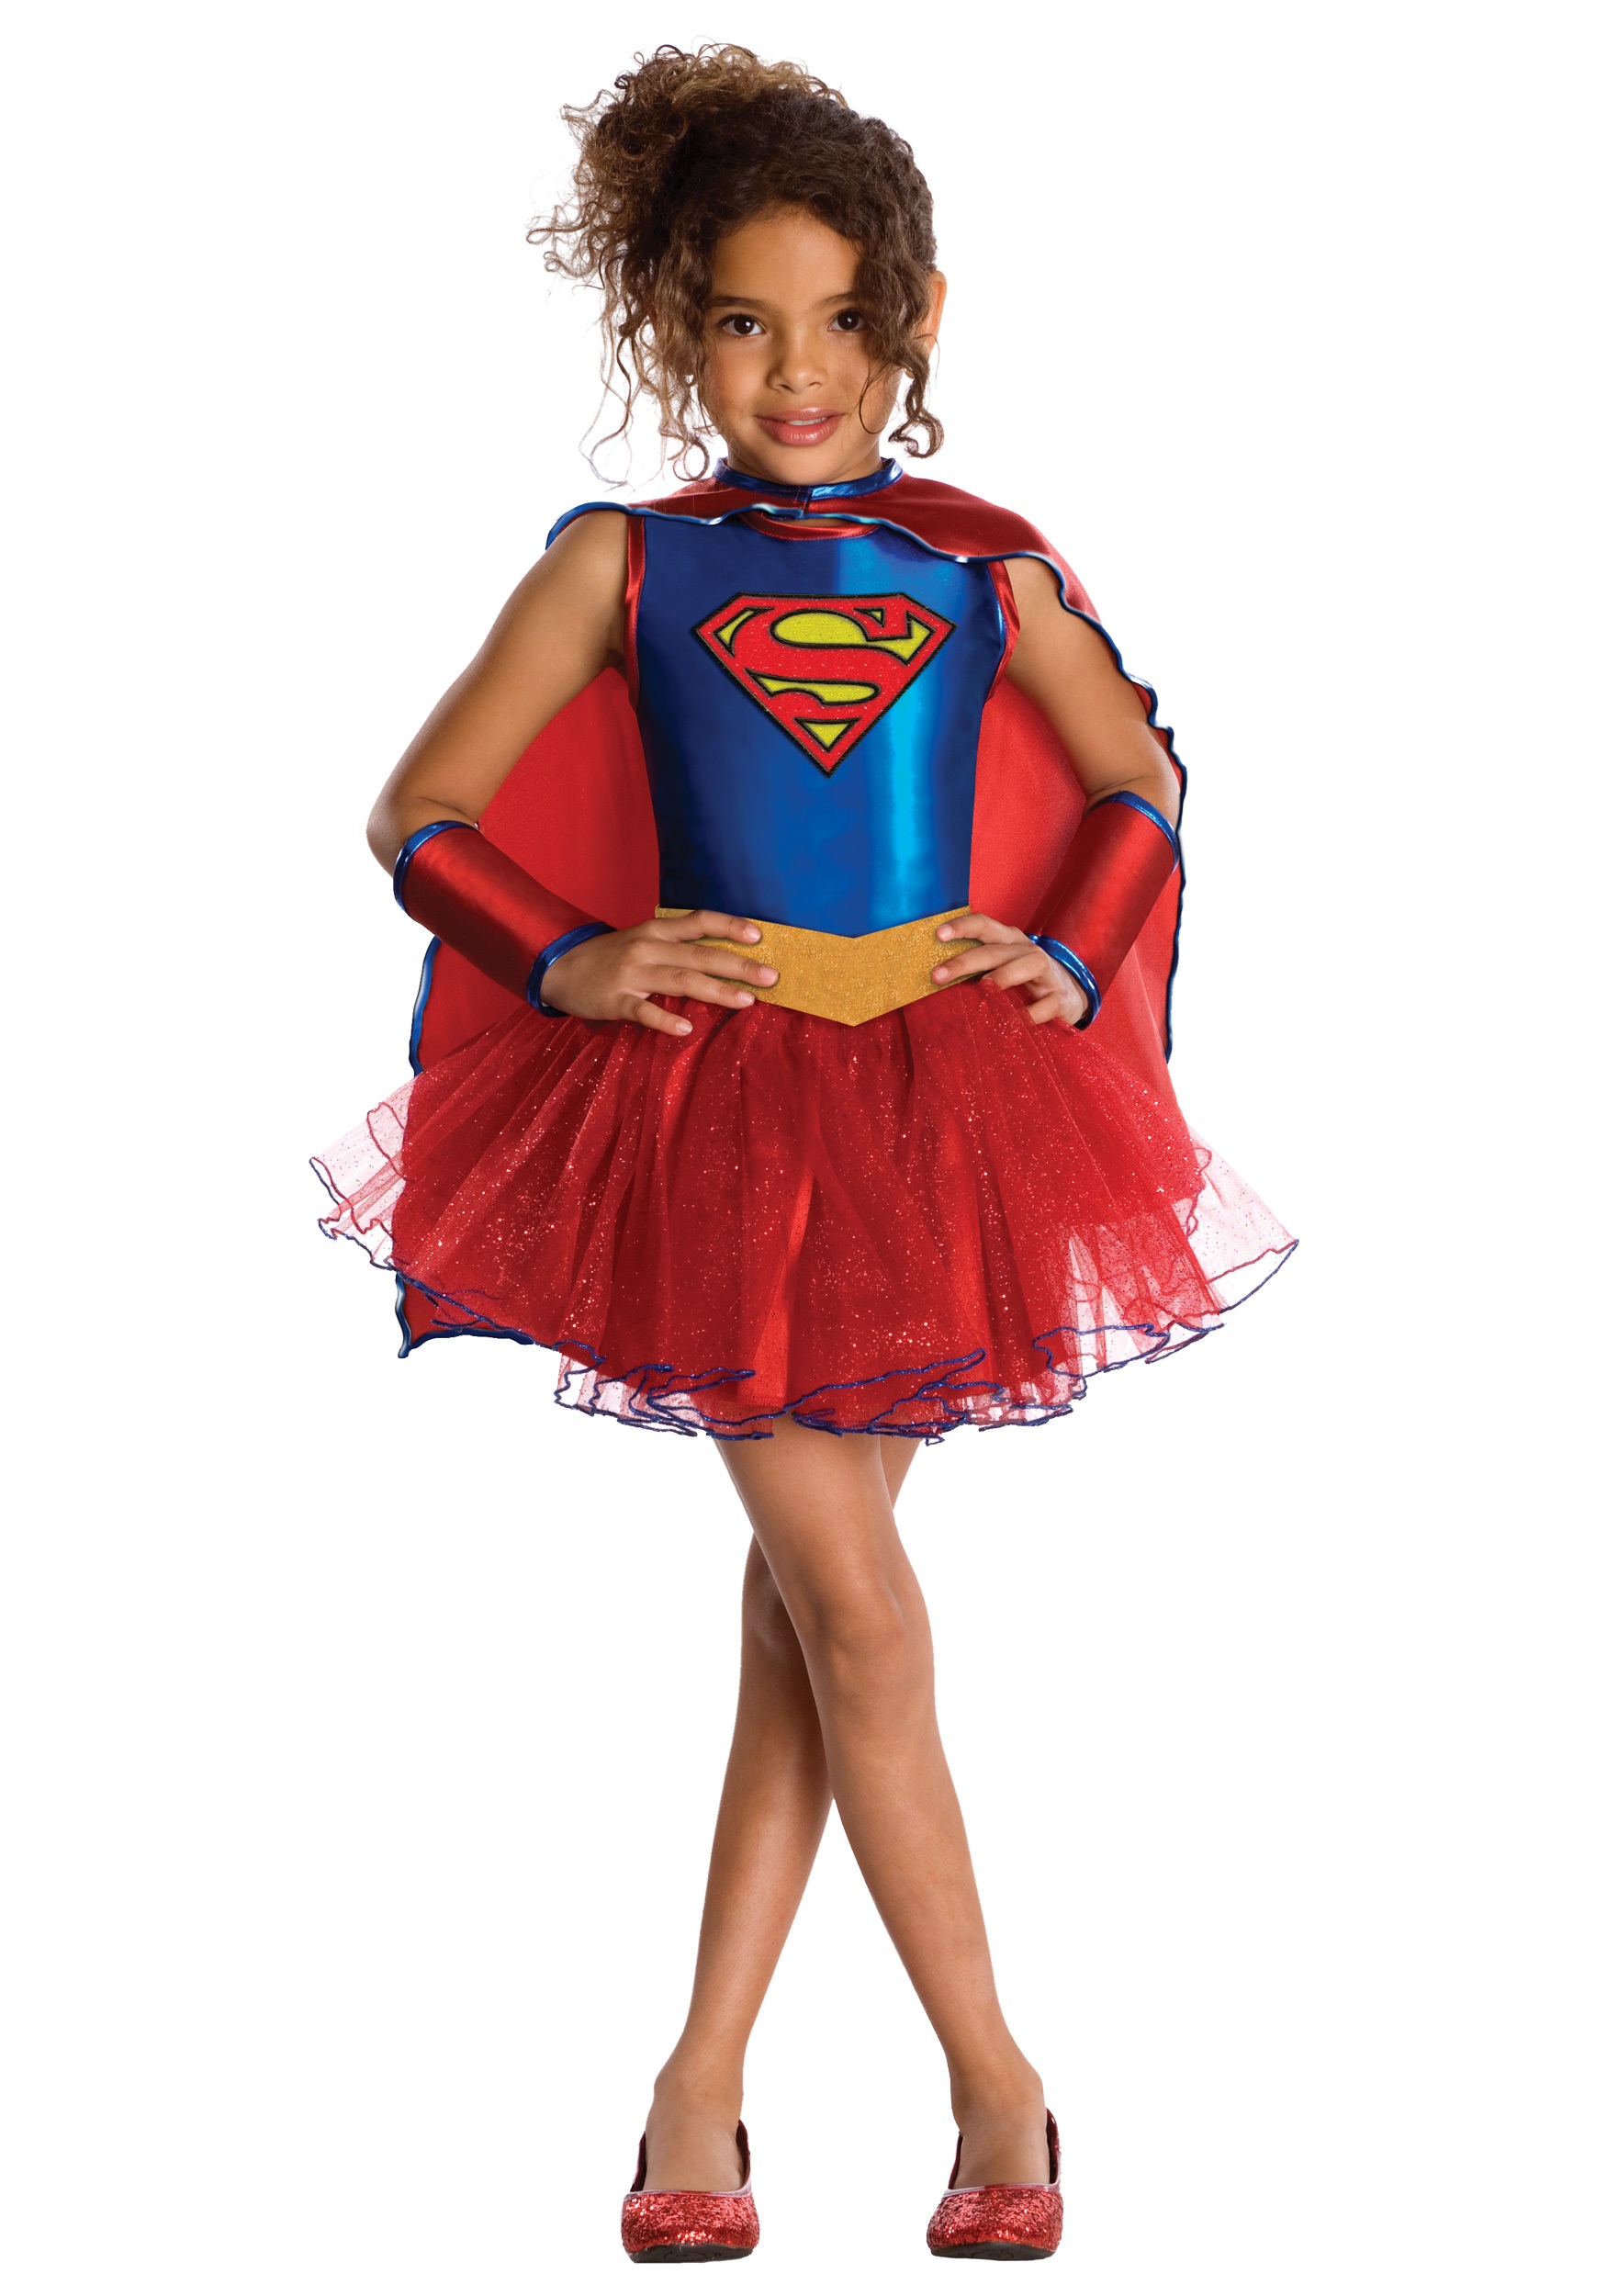 New DC Comics Supergirl Cosplay Tutu Tulle Dress with Cape Size S,M,L,XL